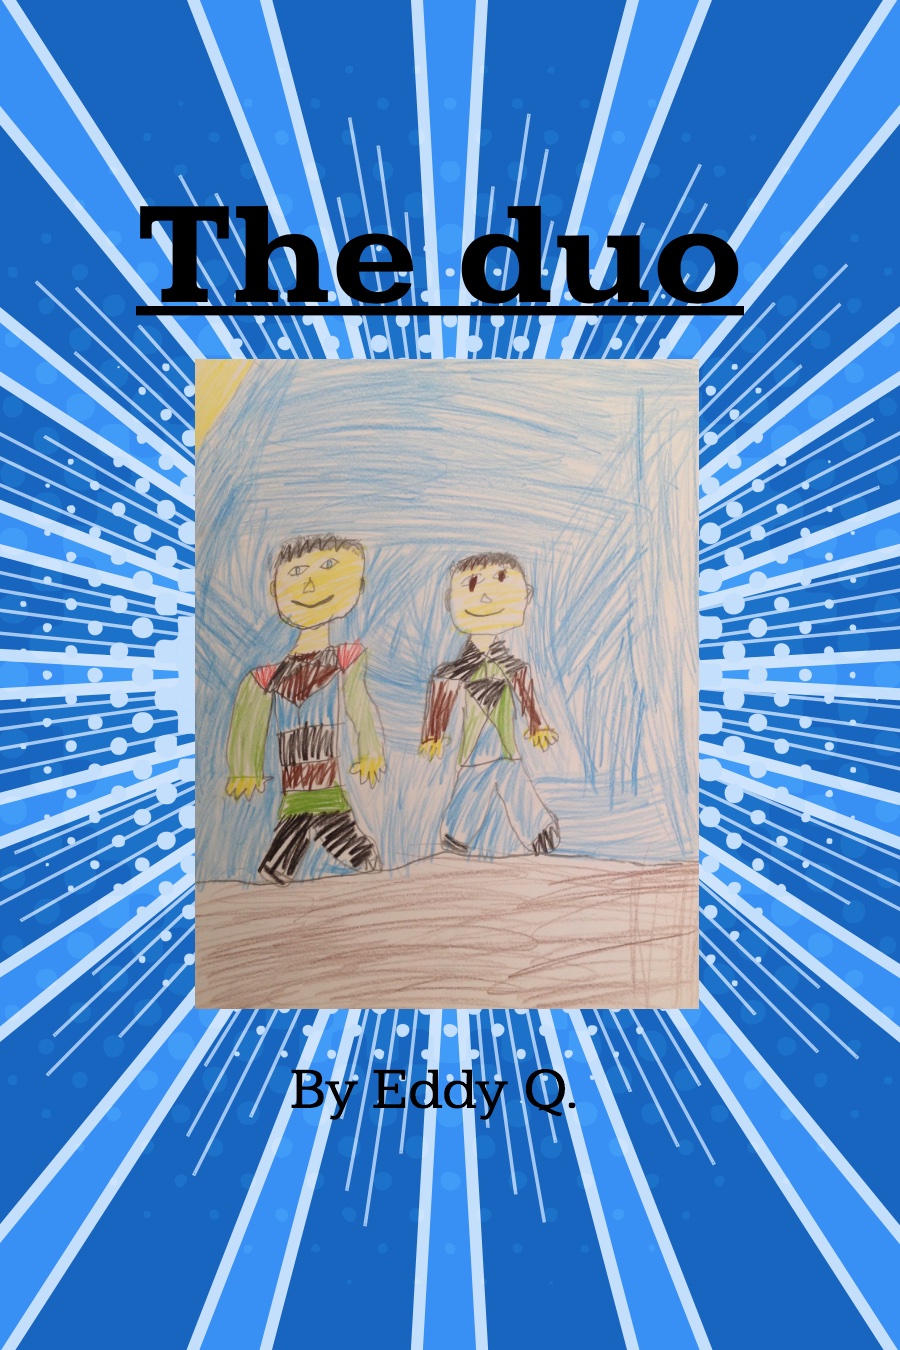 The Duo by Eddy Q